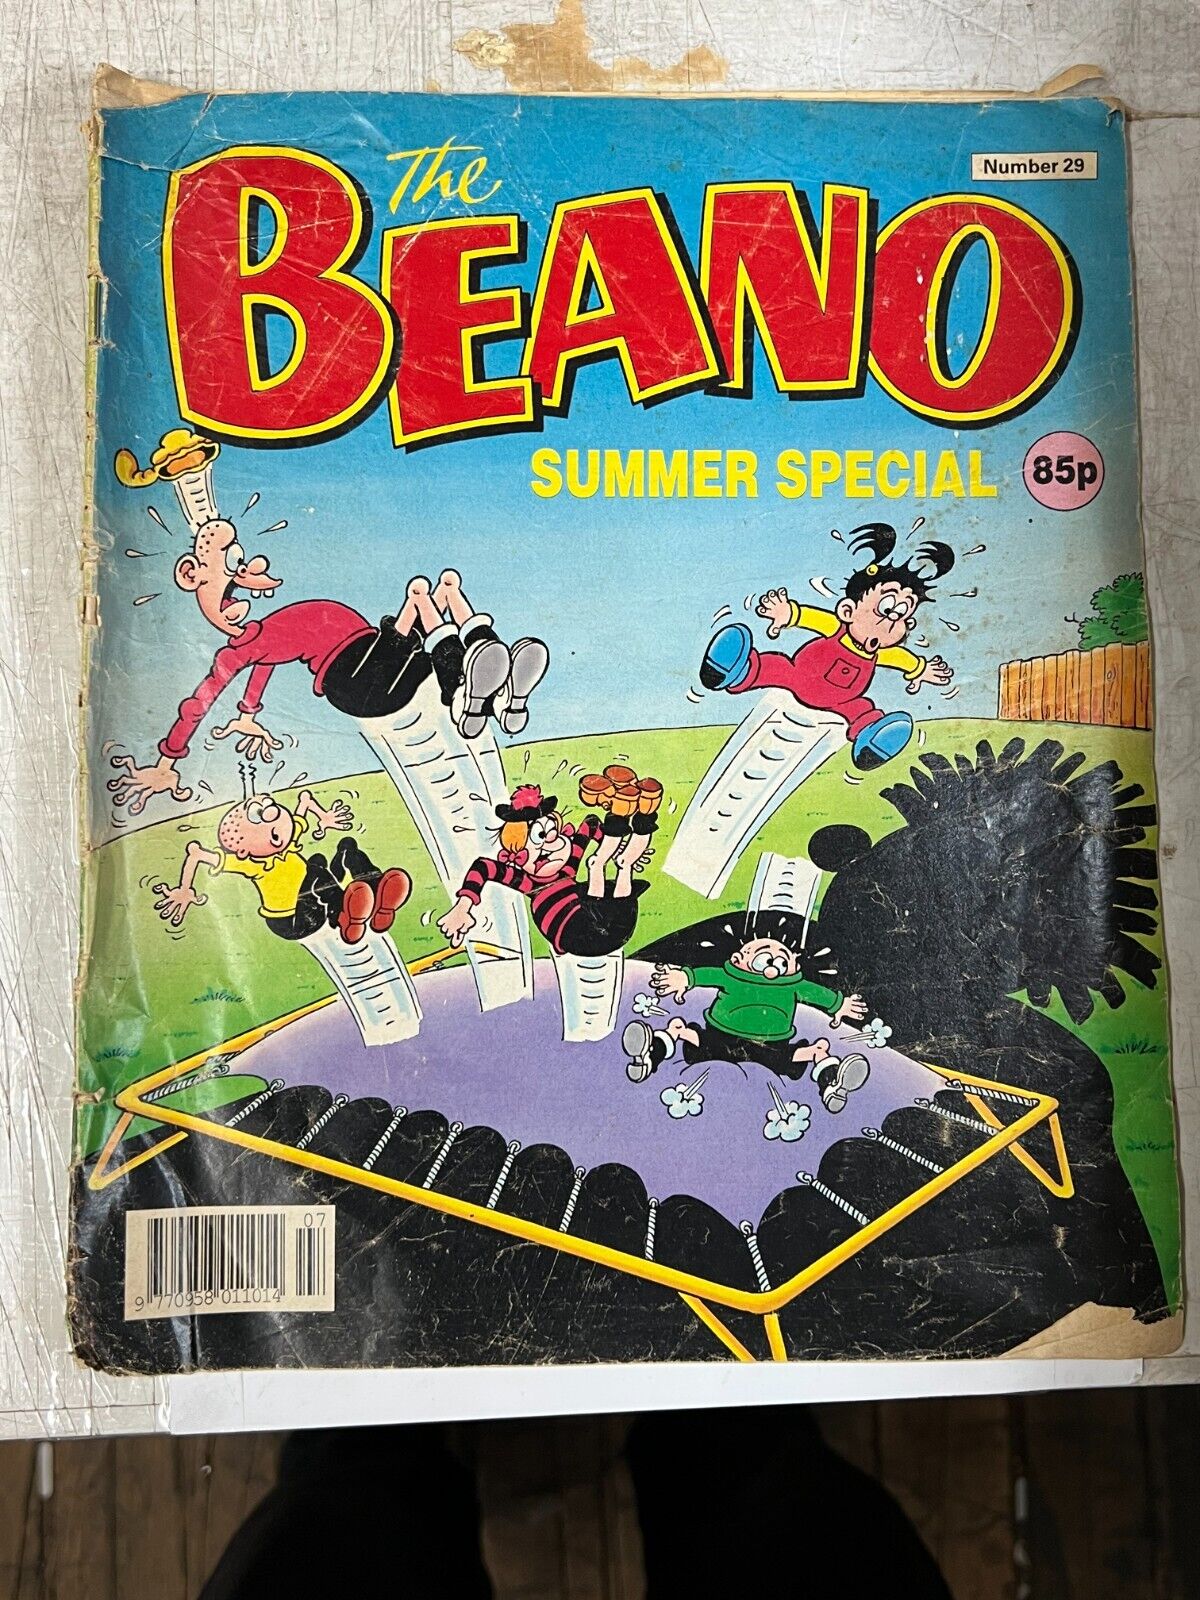 the beano #29 summer special 1991 | Combined Shipping B&B